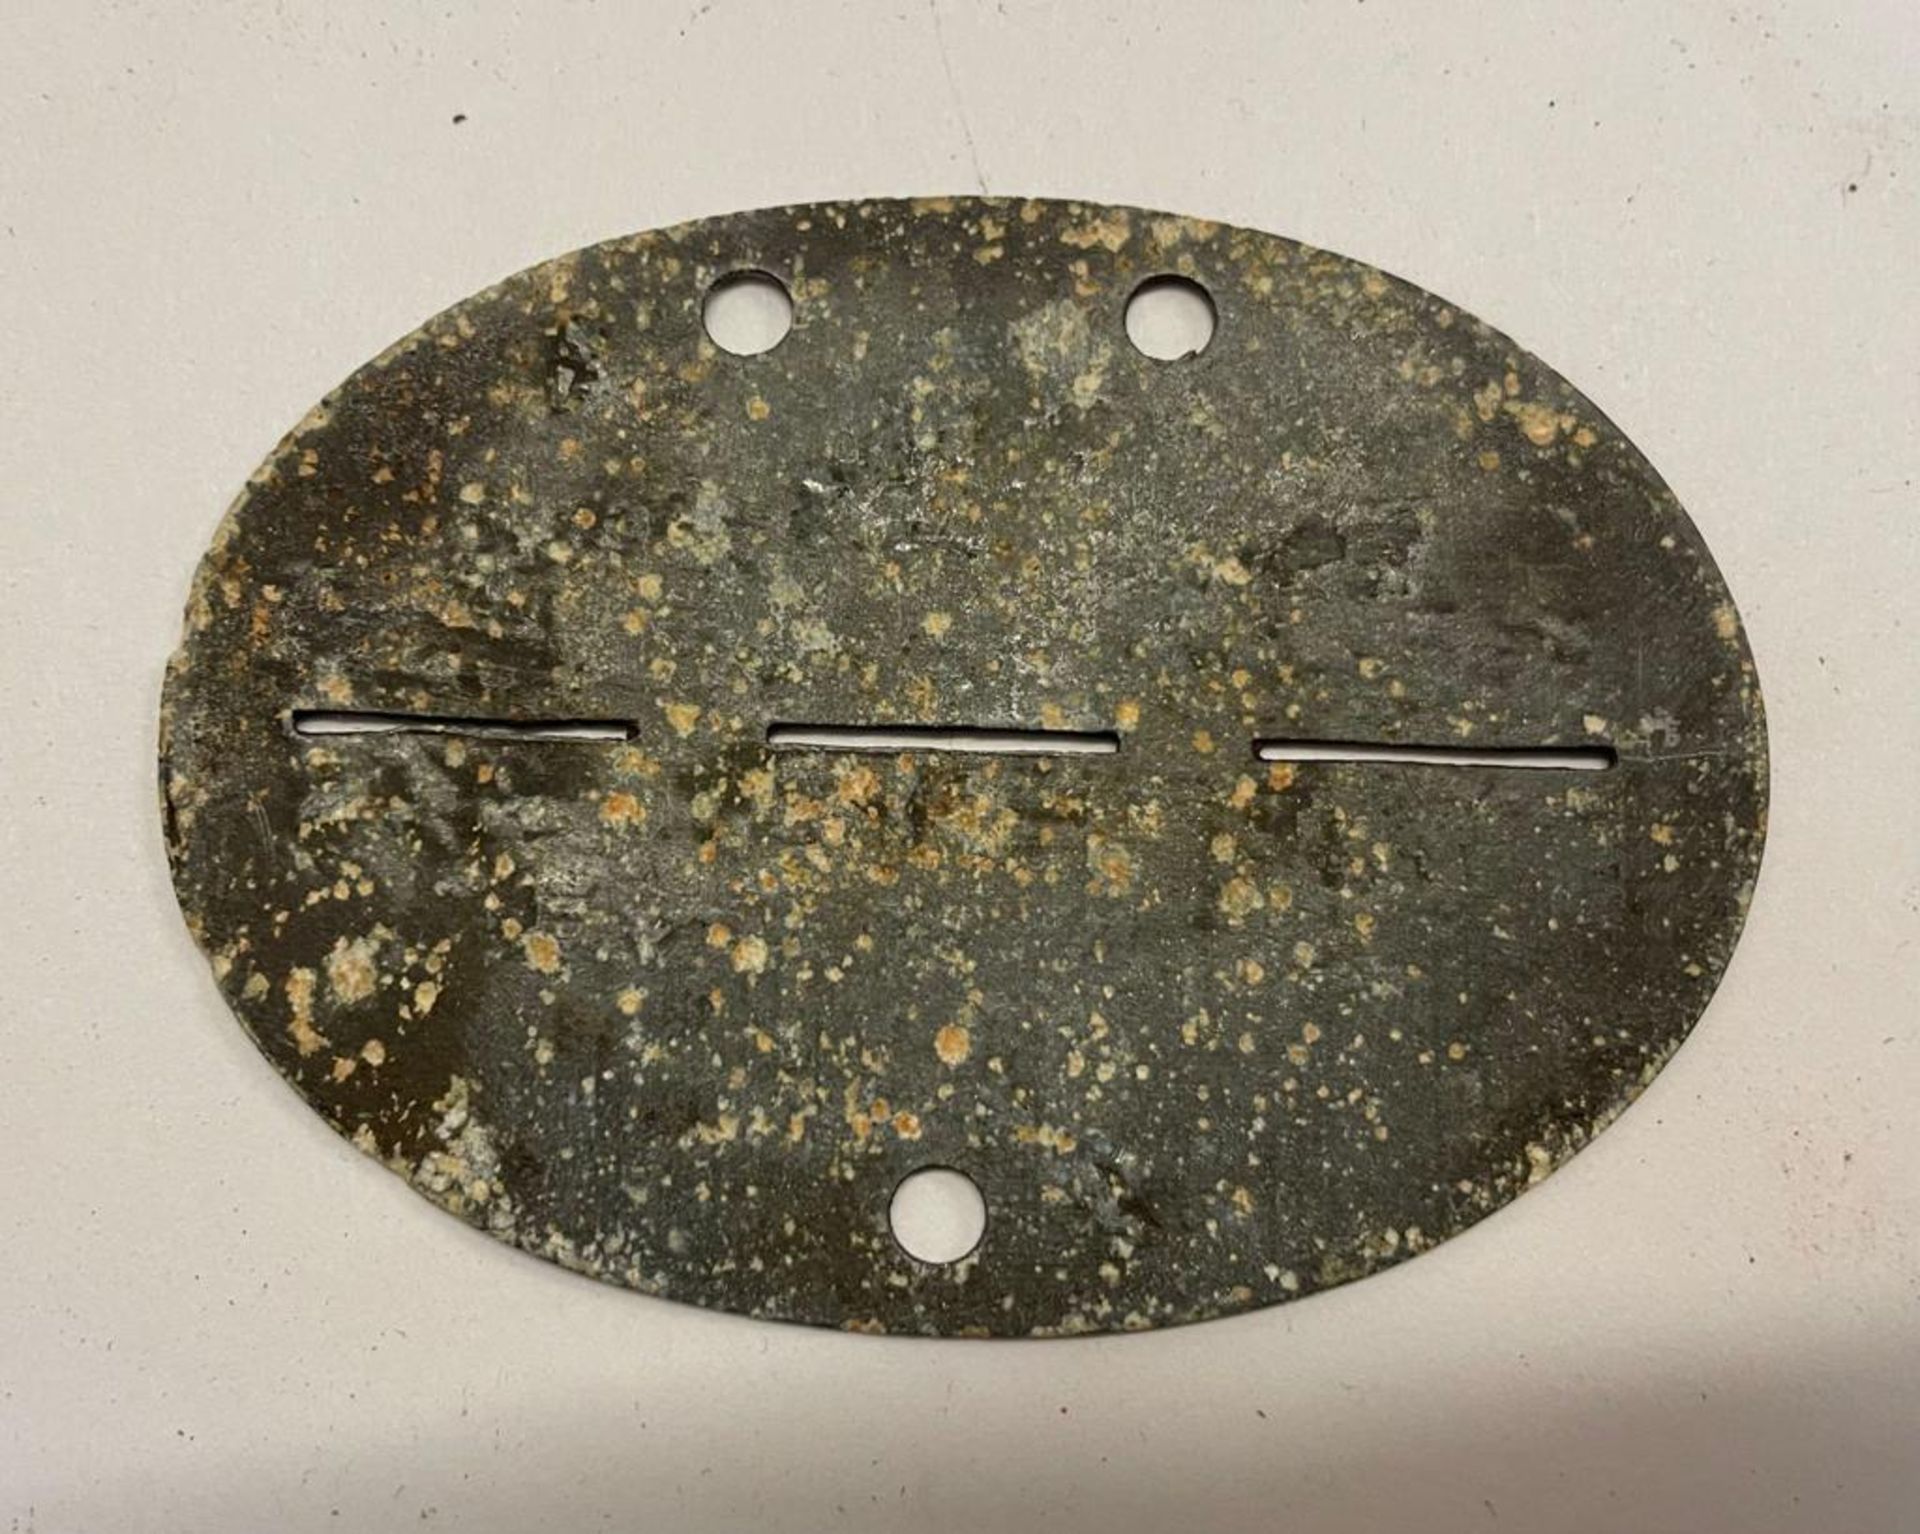 A WWII German dog tag. This lot will be available to collect in person 48 hours after the end of the - Image 2 of 3